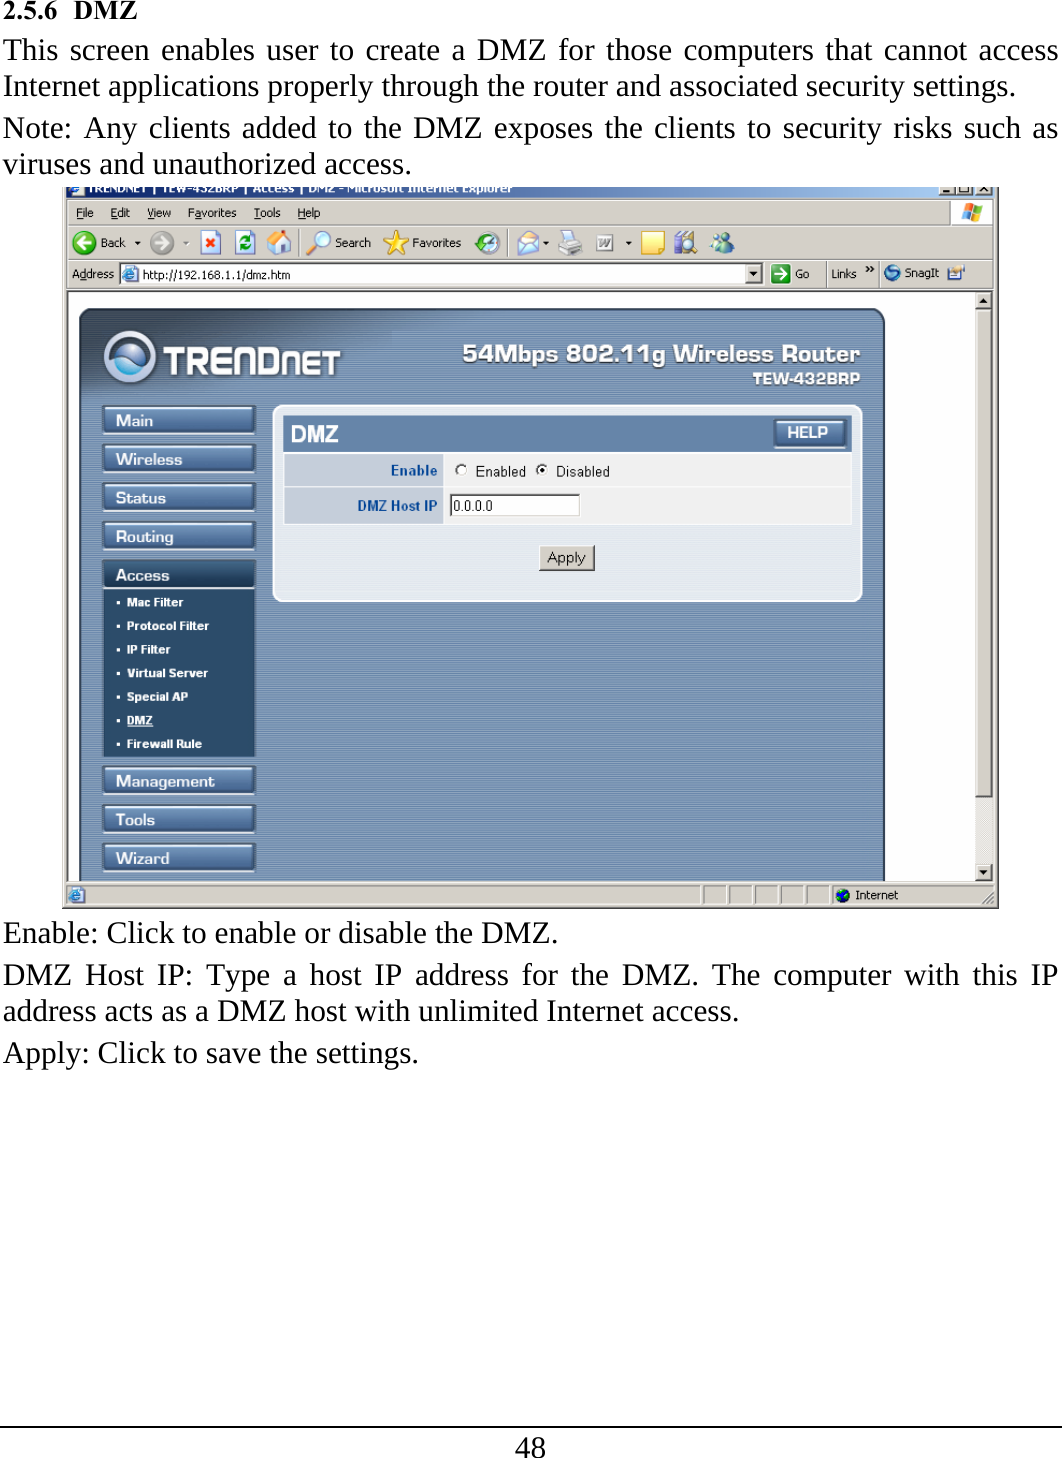 48 2.5.6 DMZ This screen enables user to create a DMZ for those computers that cannot access Internet applications properly through the router and associated security settings.  Note: Any clients added to the DMZ exposes the clients to security risks such as viruses and unauthorized access.  Enable: Click to enable or disable the DMZ. DMZ Host IP: Type a host IP address for the DMZ. The computer with this IP address acts as a DMZ host with unlimited Internet access. Apply: Click to save the settings. 